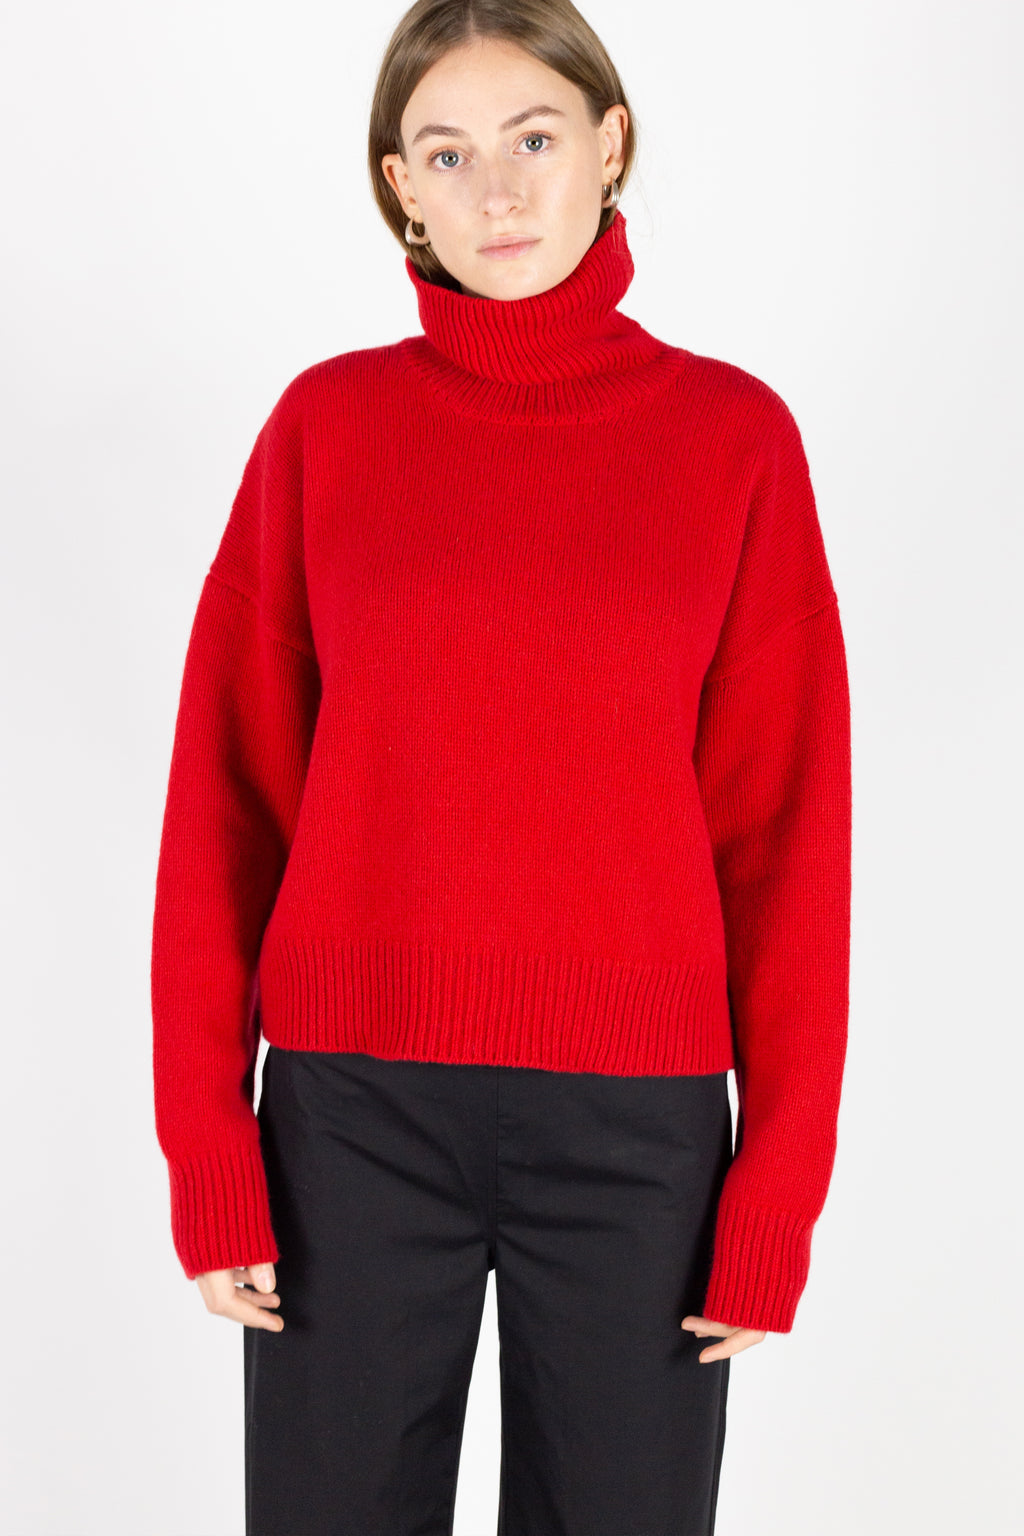 Cashmere roll neck sweater in red wool